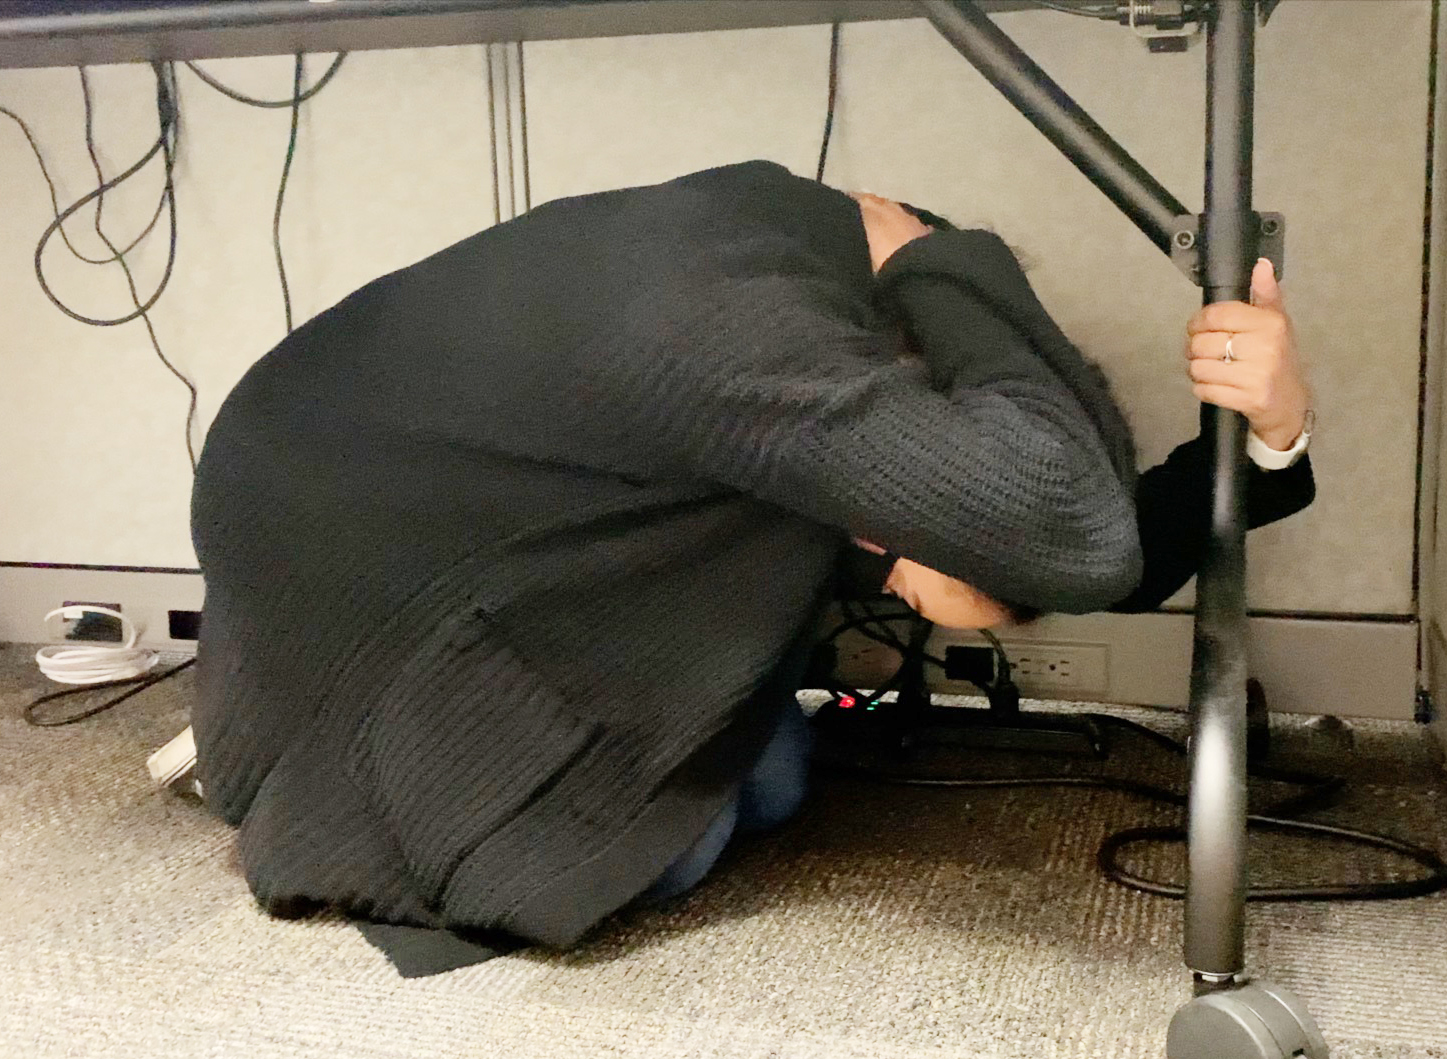 Employee under a desk covering head for earthquake drill.